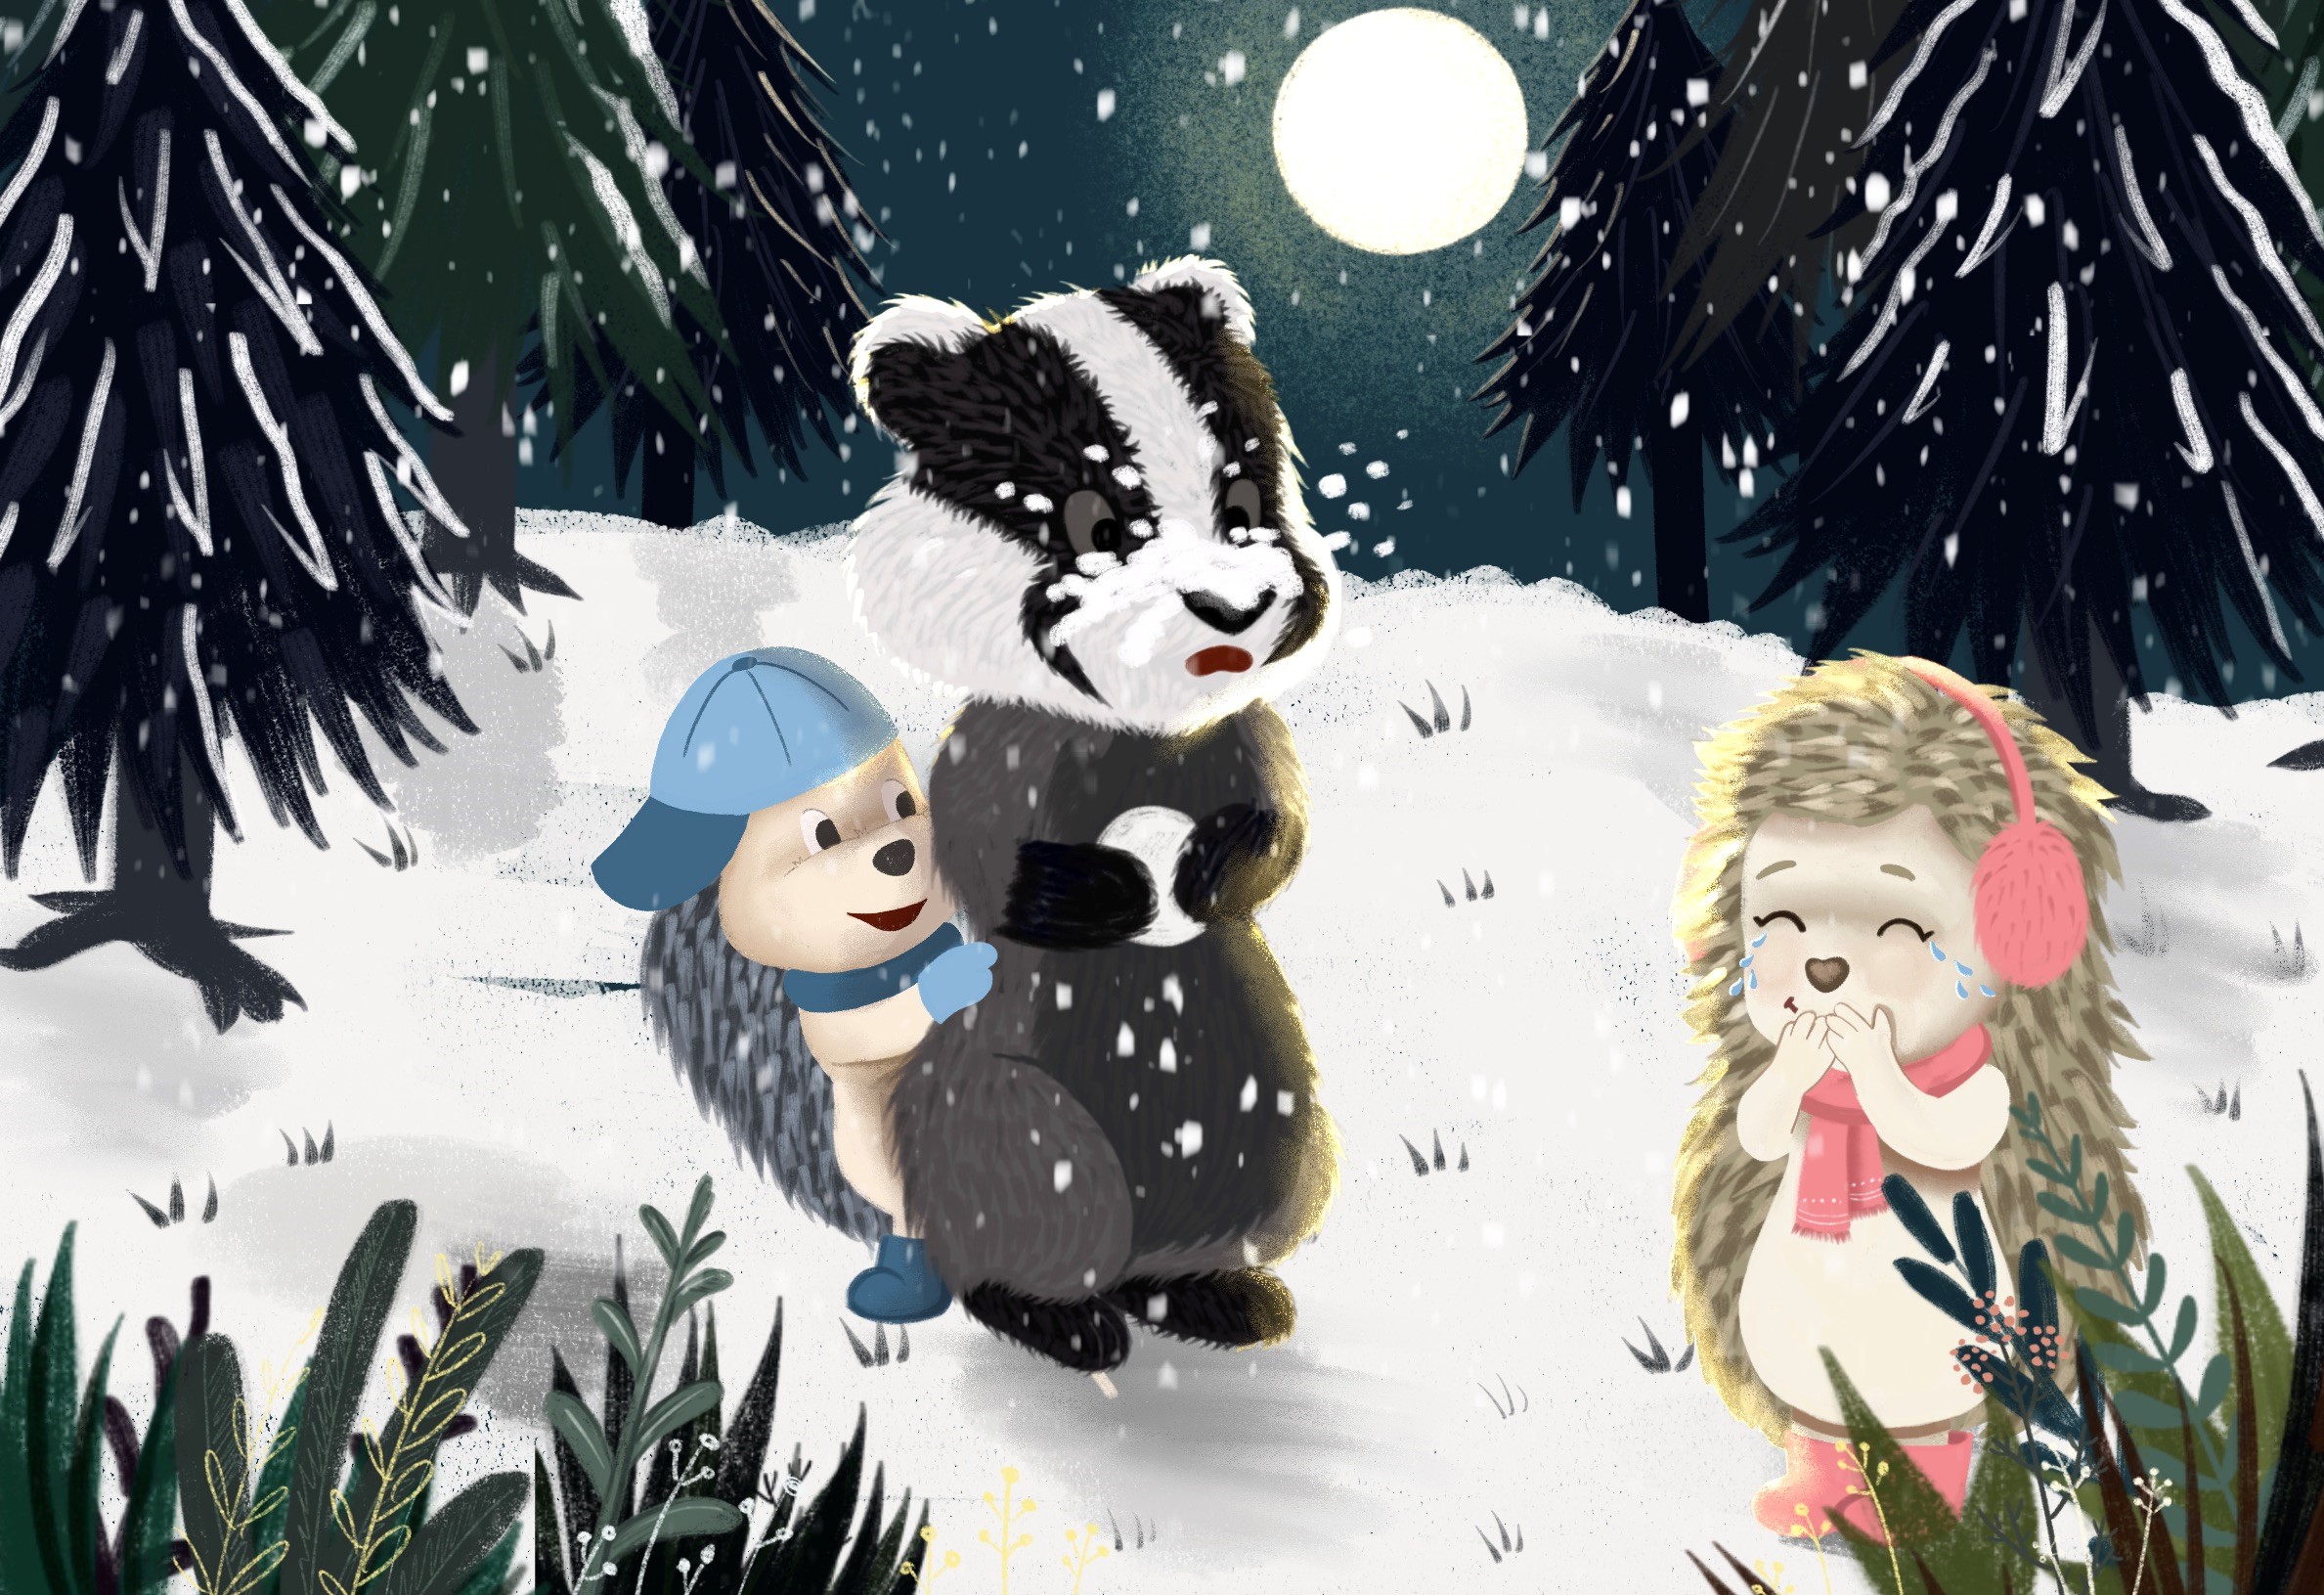 Bubble, Squeek and Billy have a snowball fight.